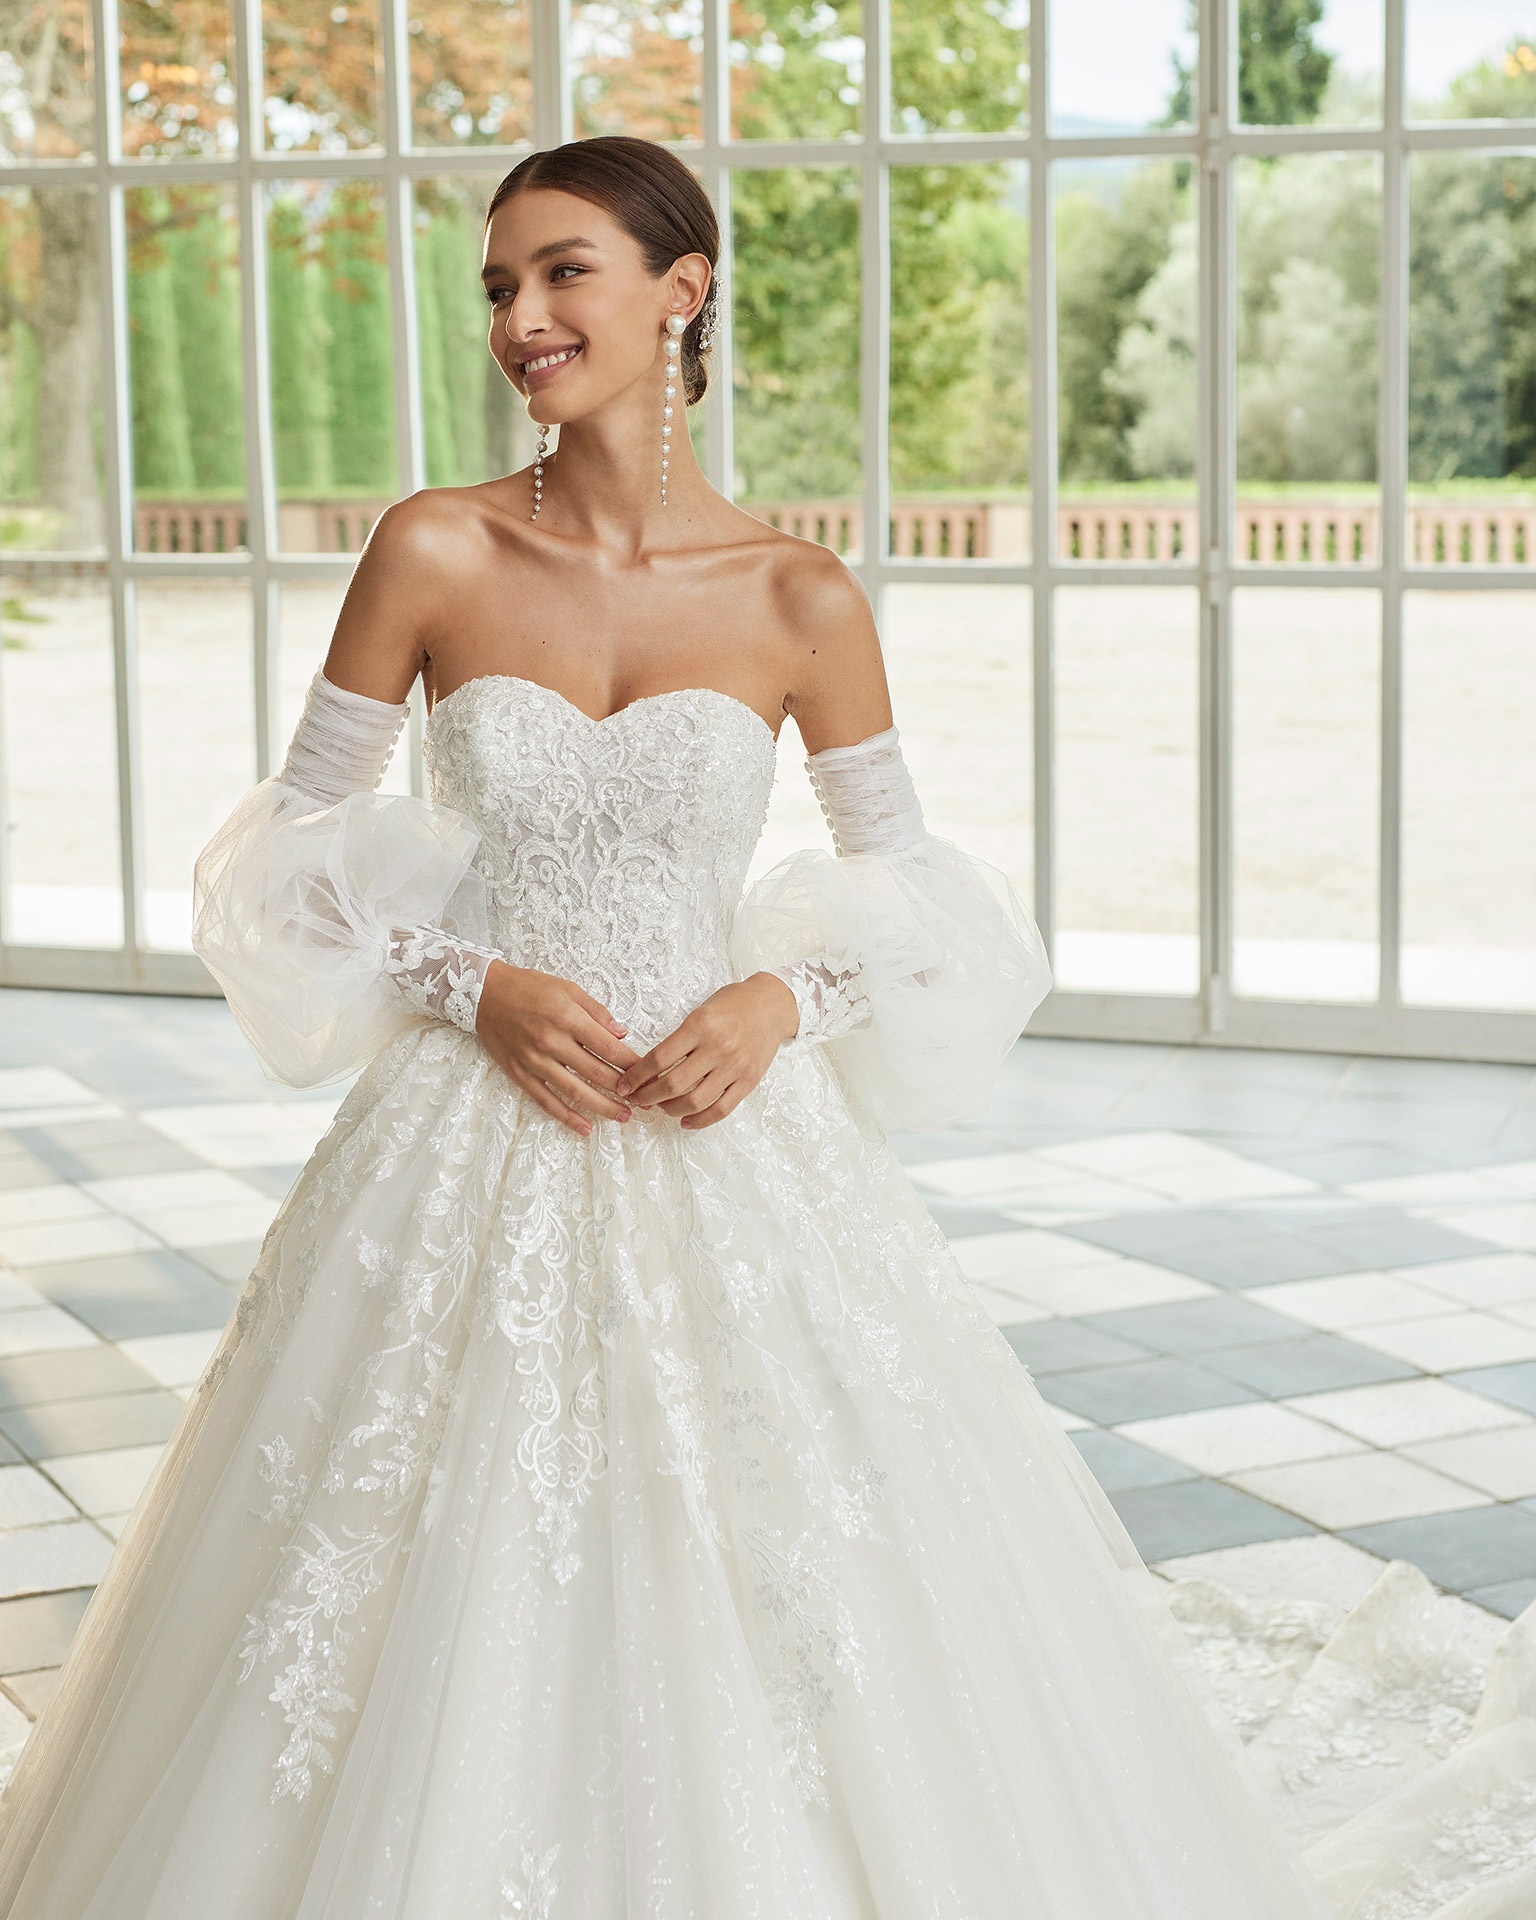 Two-piece princess-style wedding dress, featuring a full skirt; with a sweetheart neckline, a corset back, and long puffed tulle sleeves with lace and beadwork cuffs. Dreamy Luna Studio outfit made of tulle and beadwork embroidered lace. LUNA_NOVIAS.